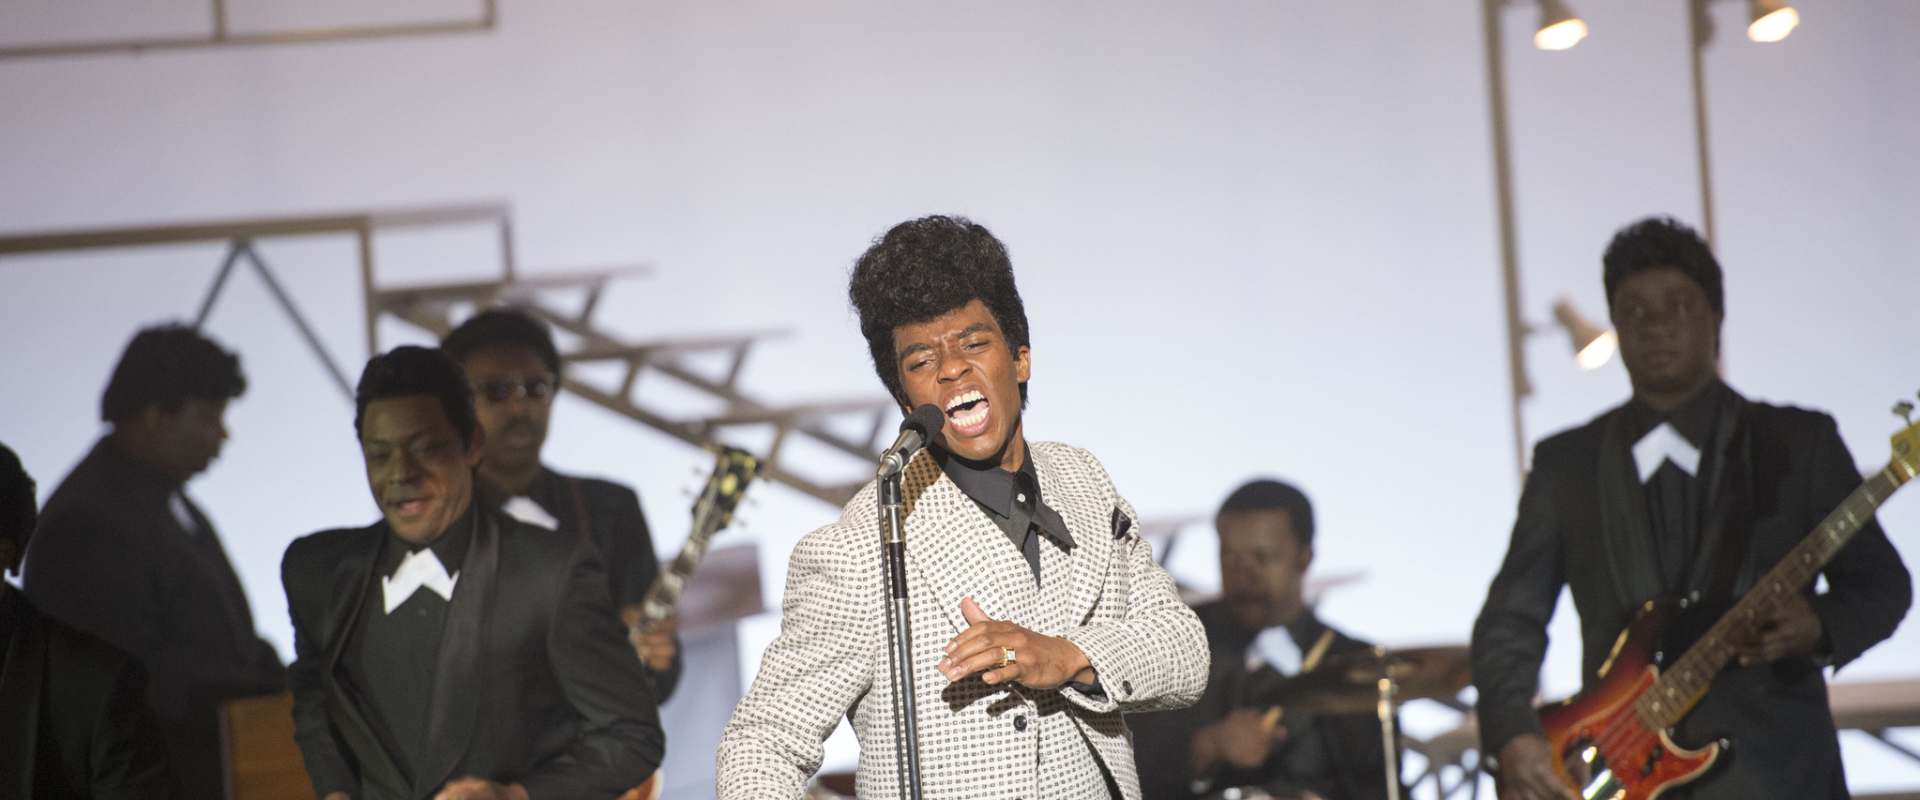 Get on Up background 2